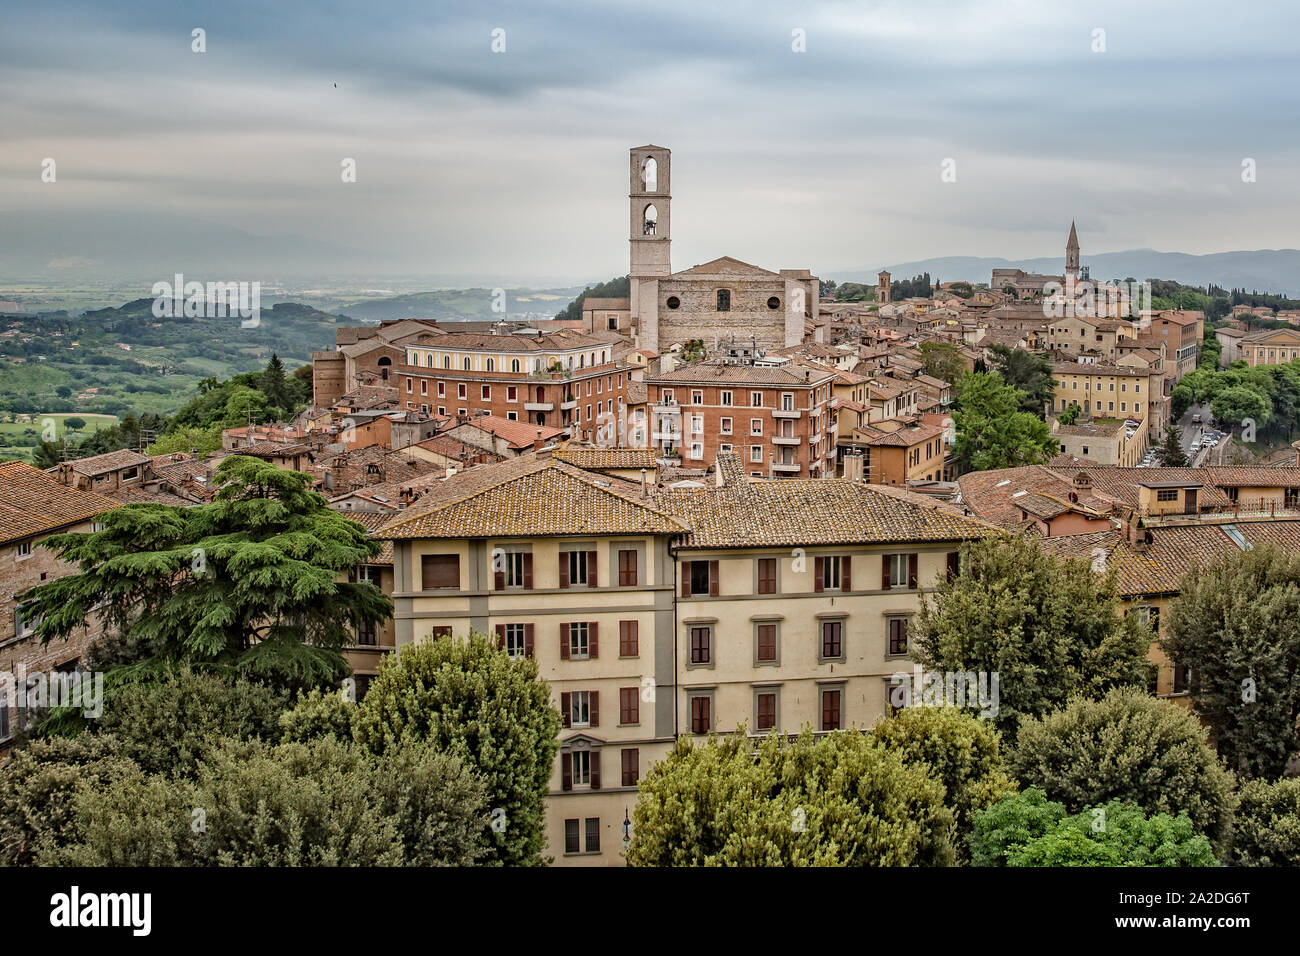 Perugia is a lively medieval walled hill town. View of the Basilica of San Domenico with medieval houses in Perugia historic quarter, Umbria, Italy Stock Photo